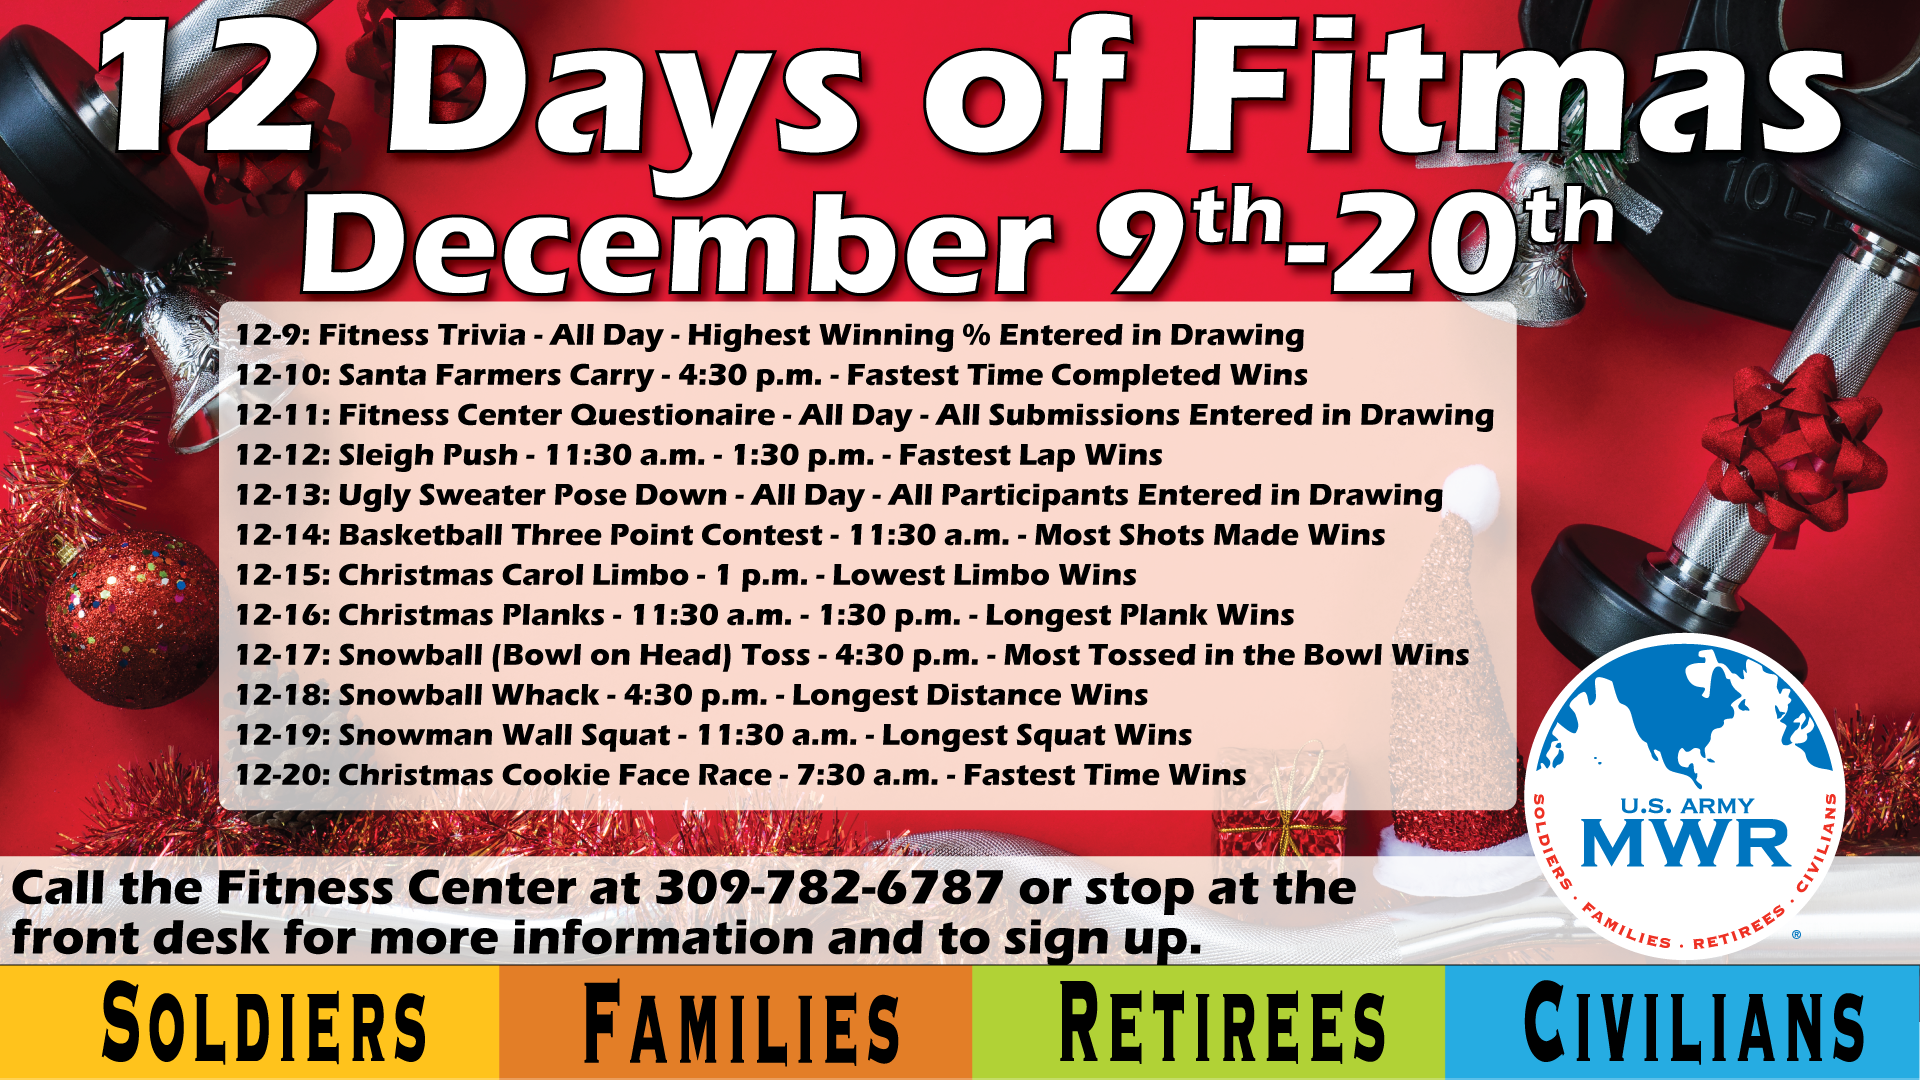 12-Days-of-Fitmas-schedule-handouts.png